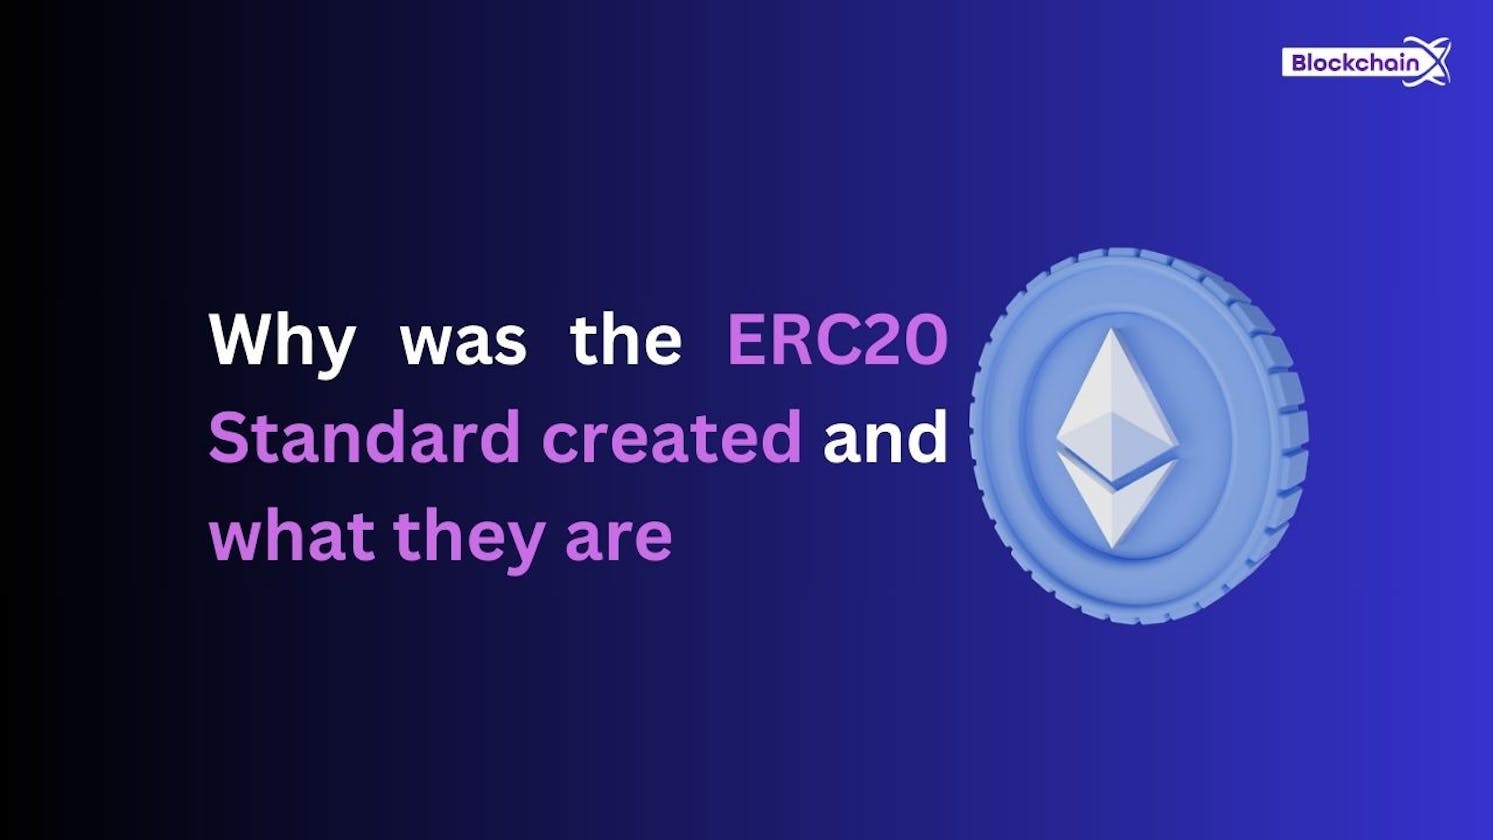 Why was the ERC20 Standard created and what they are?